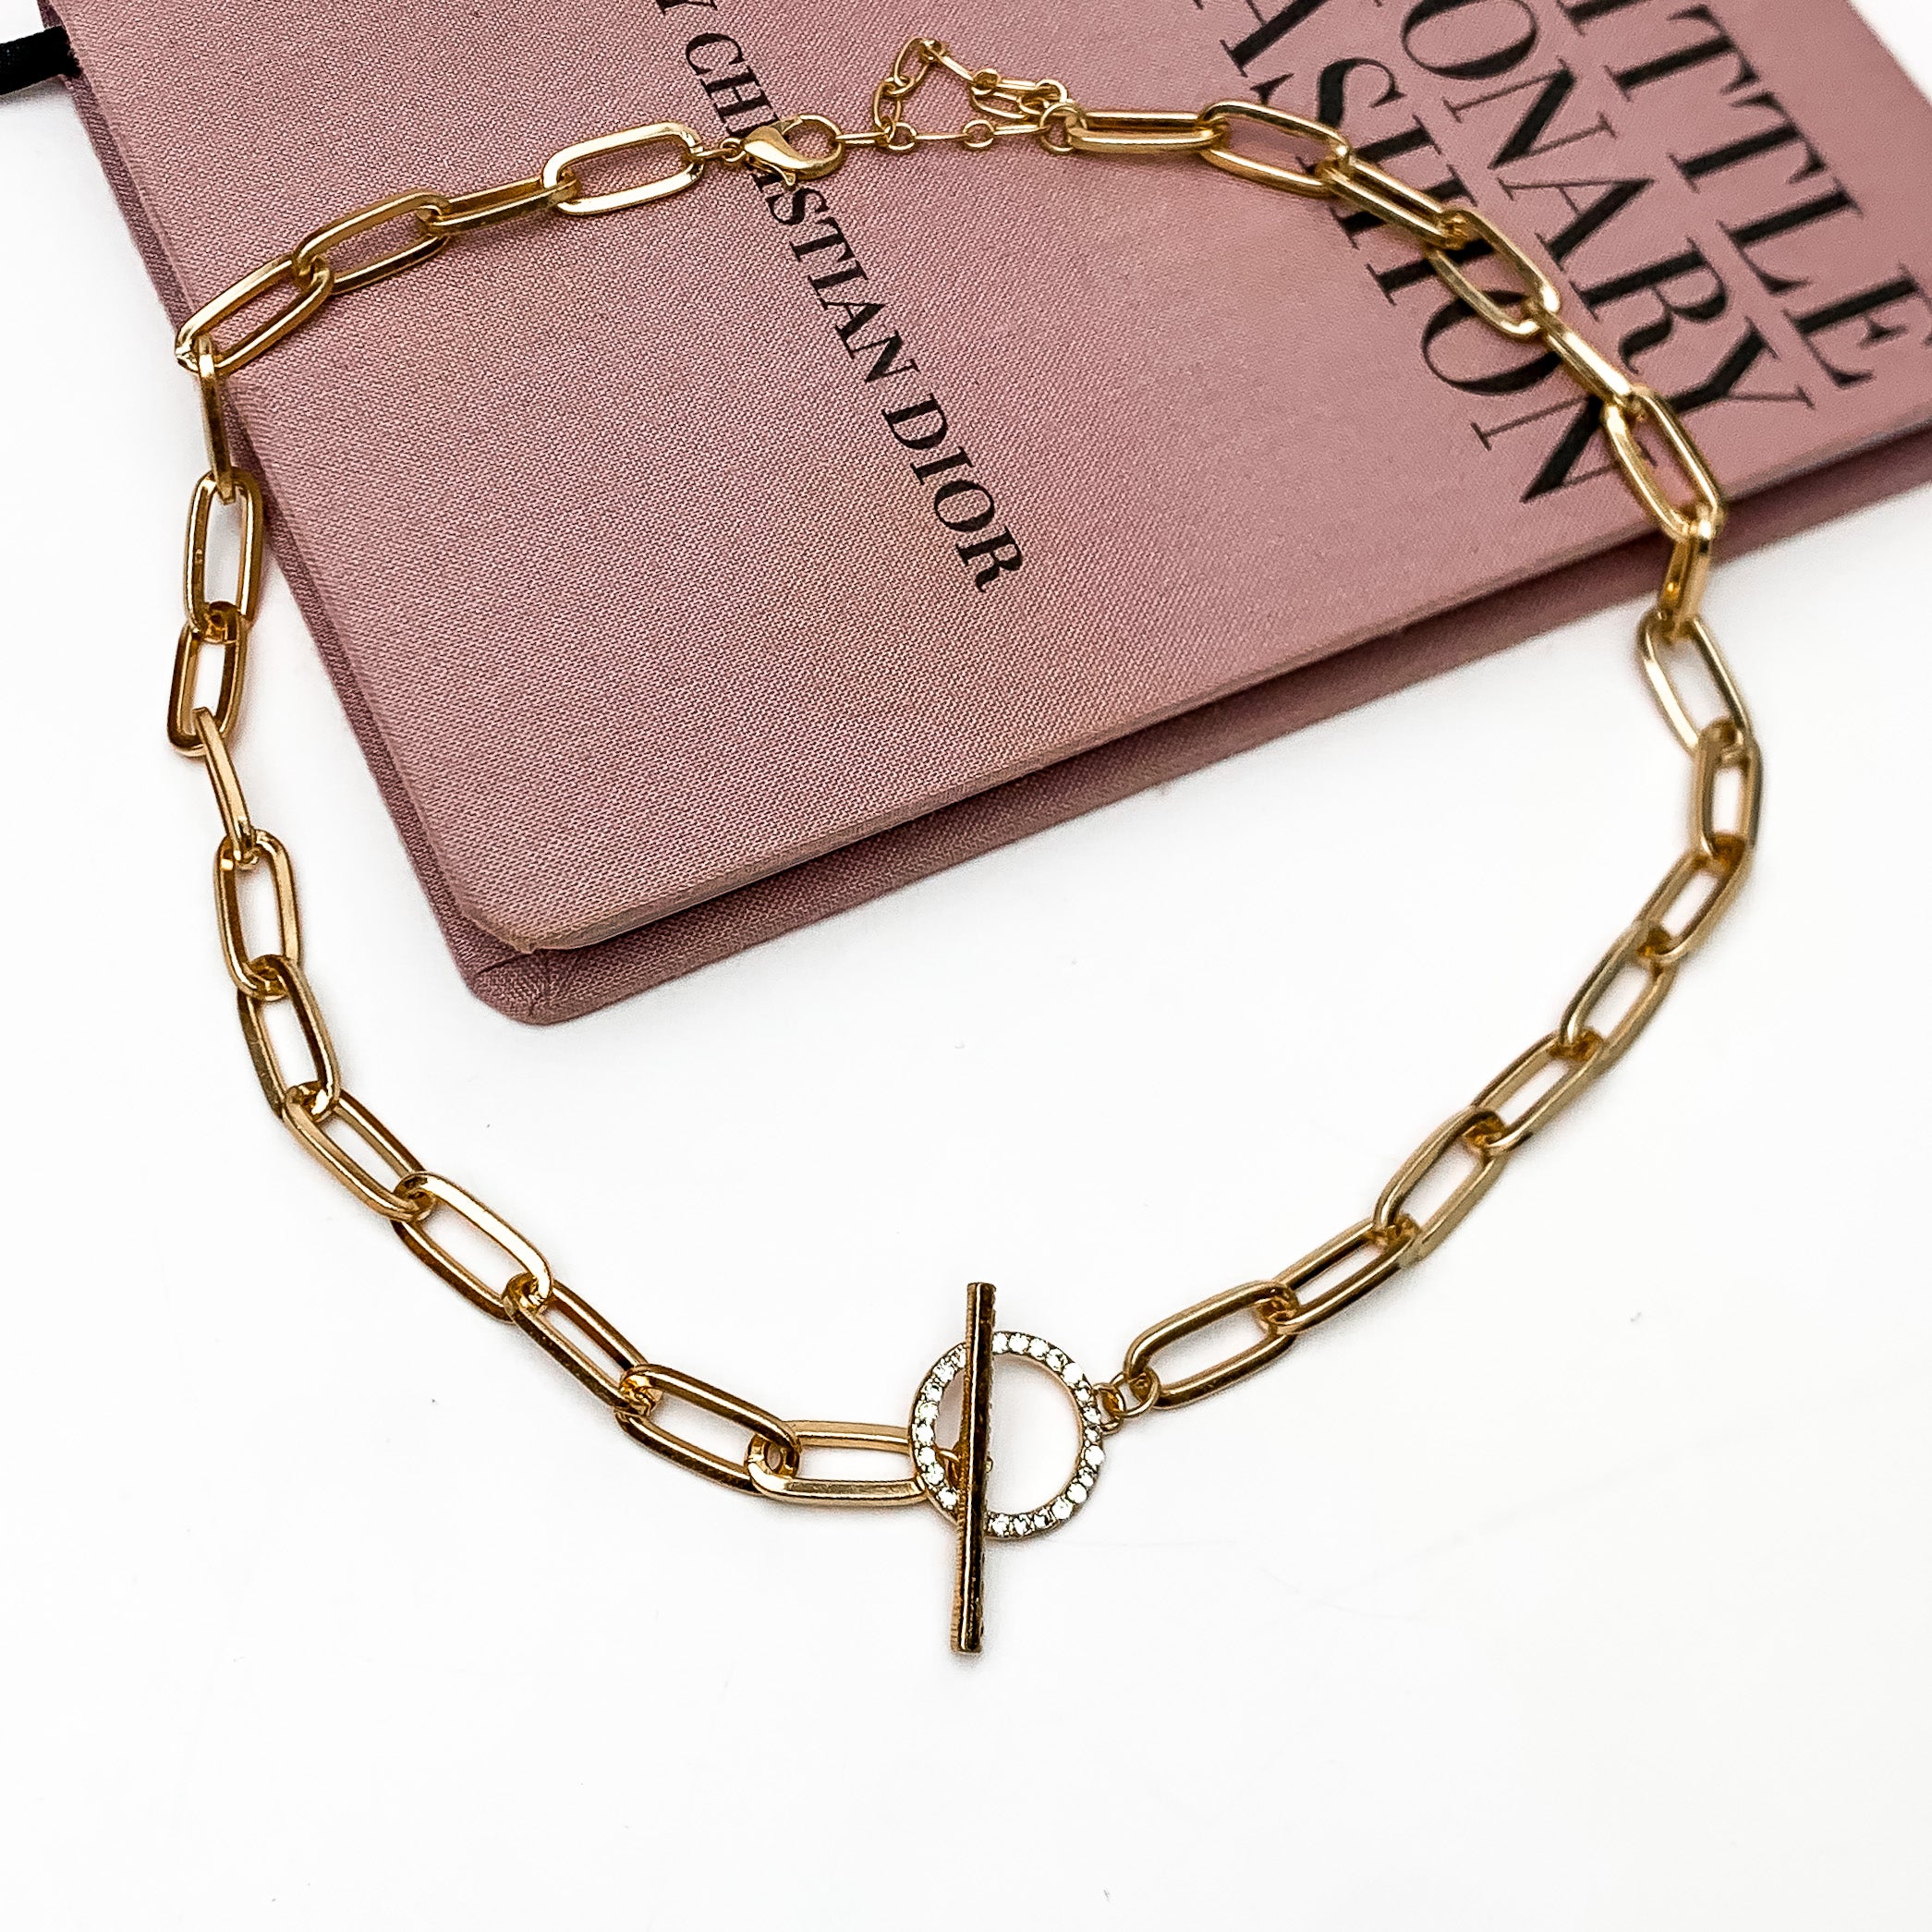 Gold Tone Chain Necklace With Front Toggle. This front toggle gold necklace is on a white background with a pink book behind the necklace.